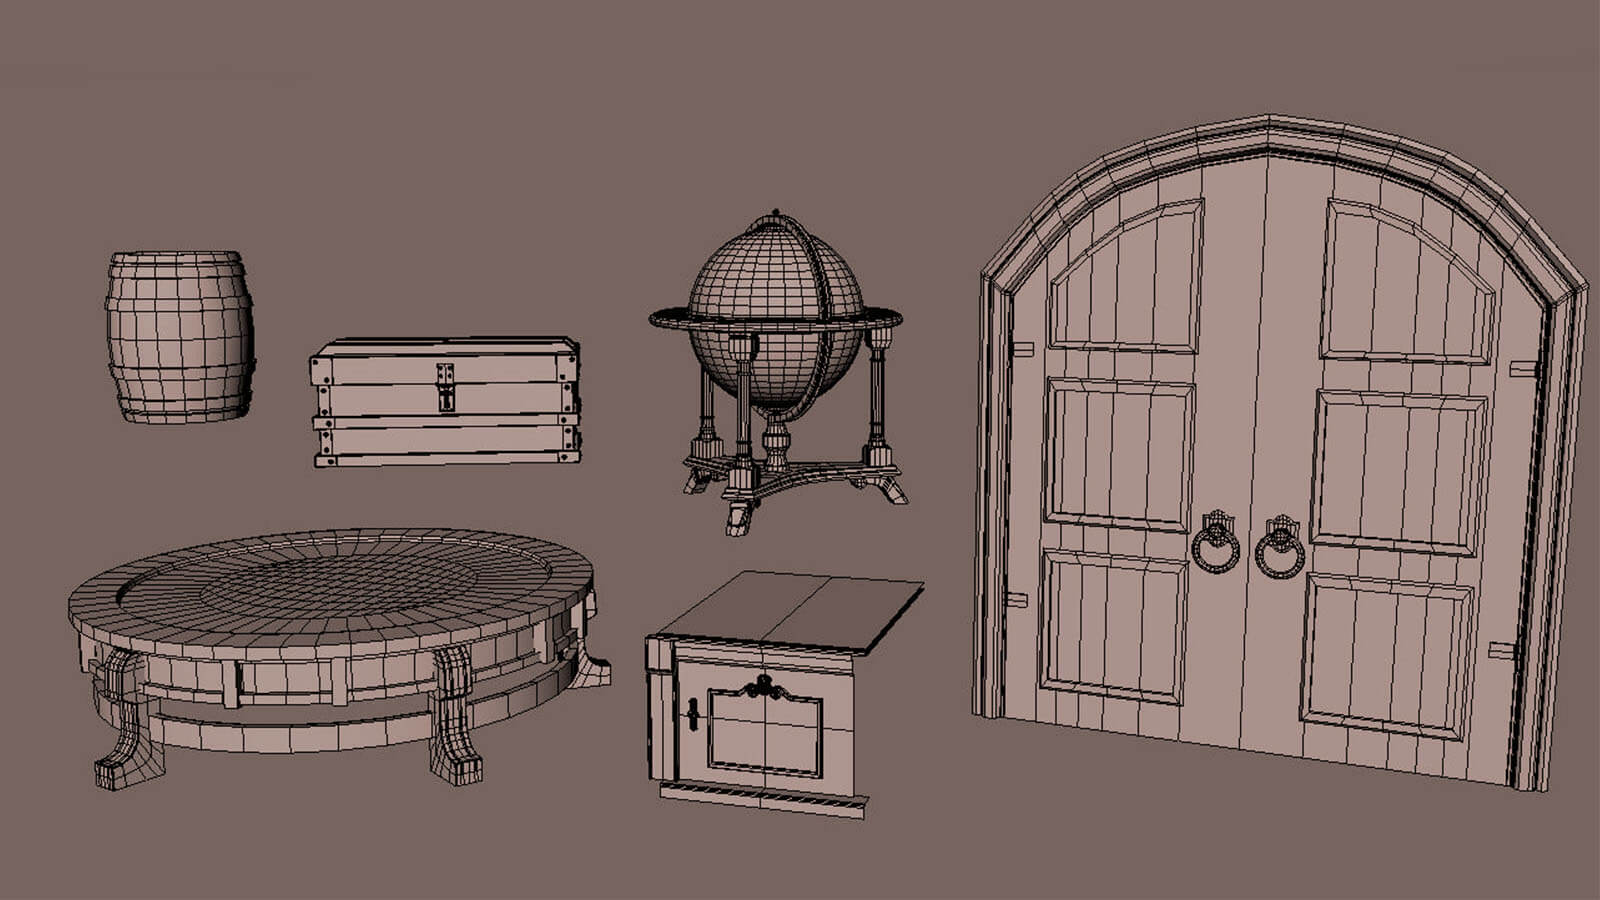 Untextured background objects used in the pirate chamber scene